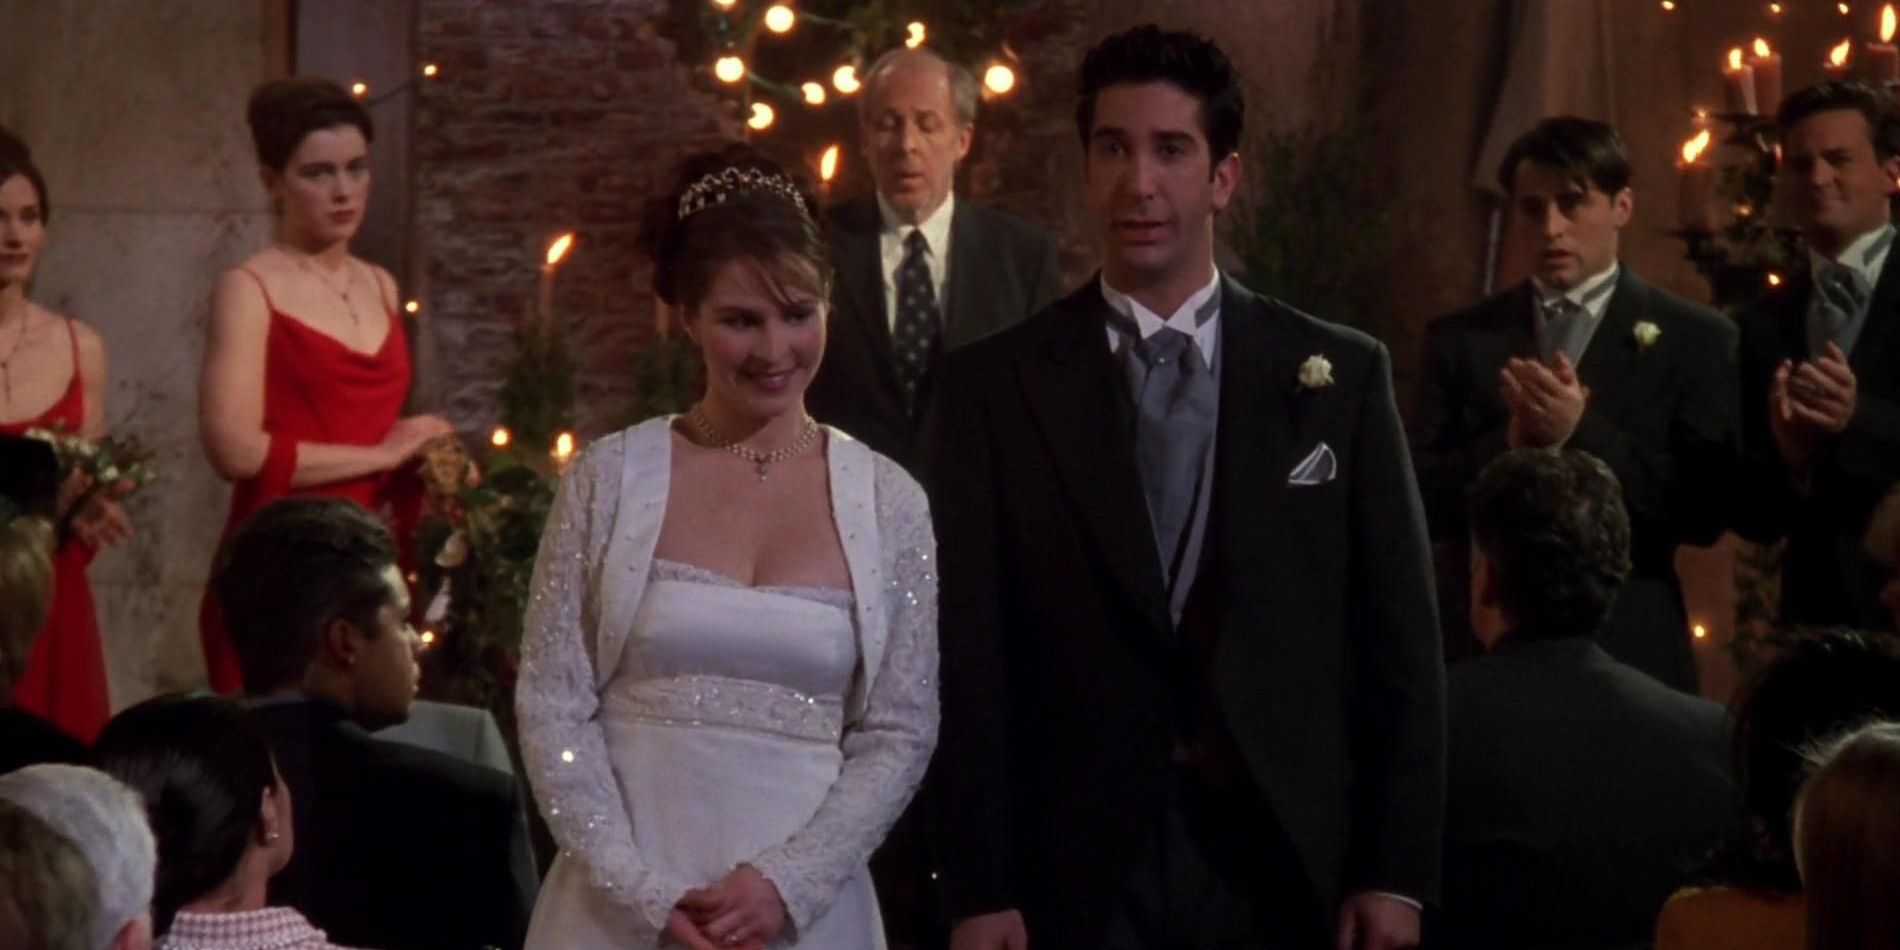 Emily and Ross at their wedding in Friends